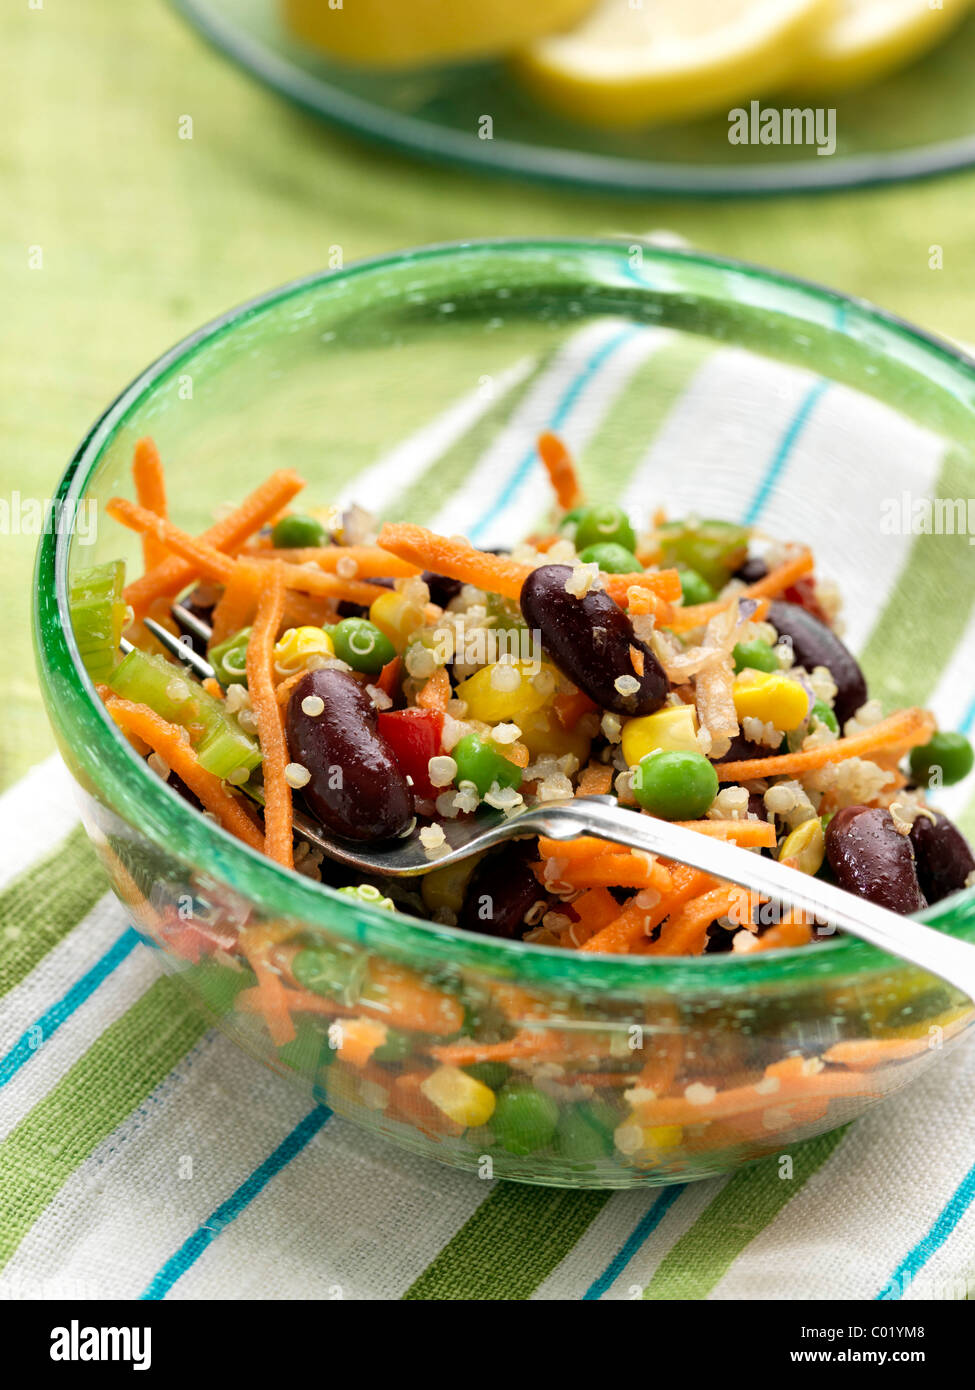 Vegetarian quinoa salad with peas carrots celery red kidney beans Stock Photo